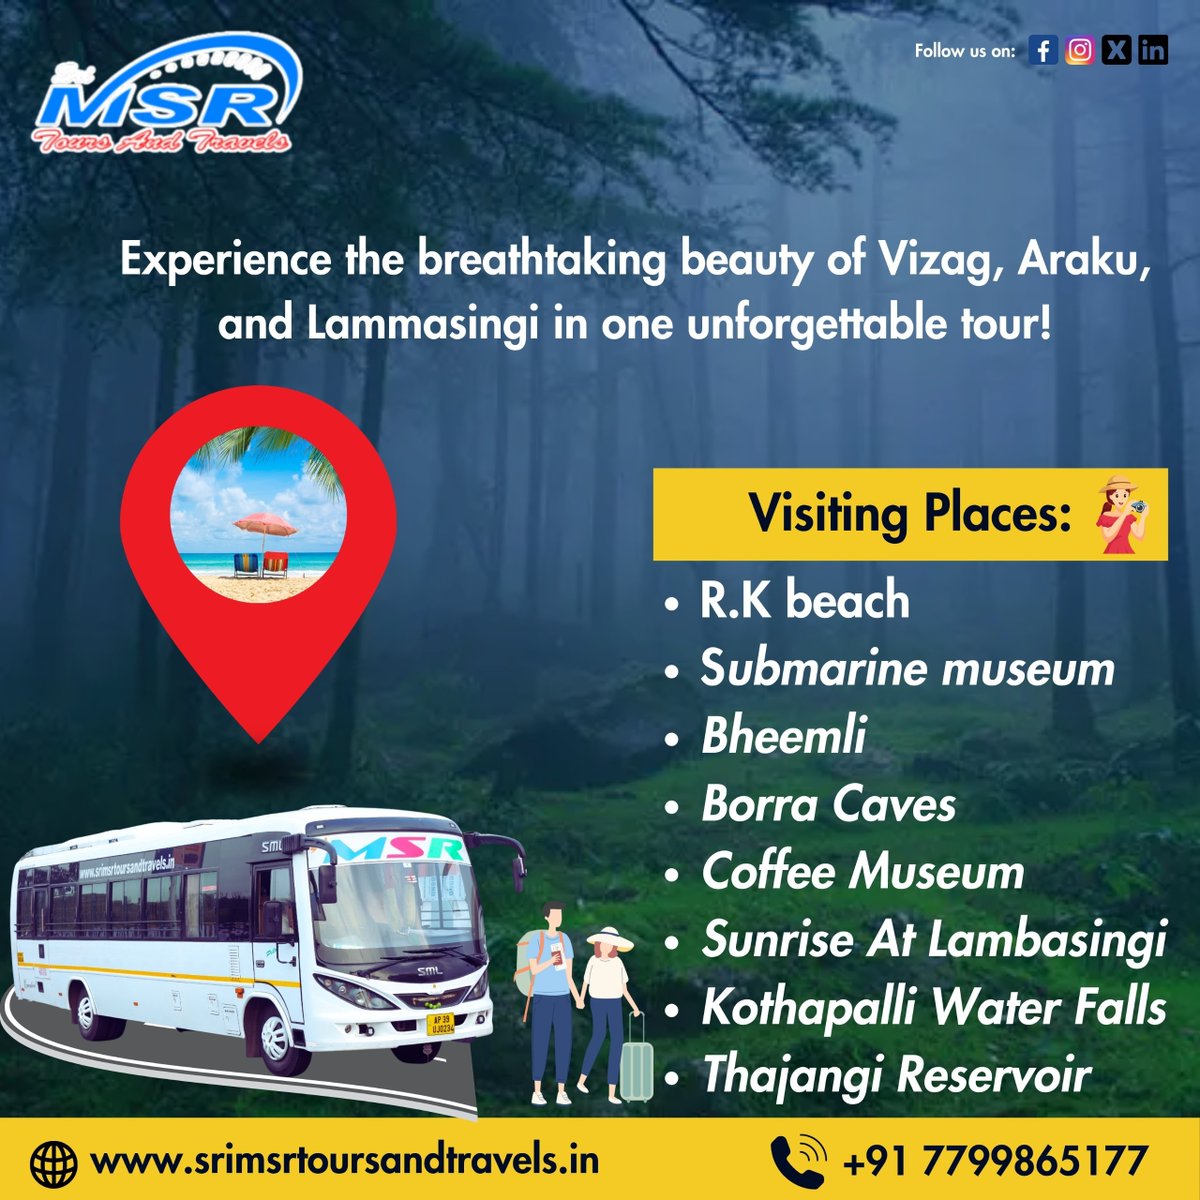 'Experience the breathtaking beauty of Vizag, Araku, and Lammasingi in one unforgettable tour with Sris Tours and Travels! 🚌🌄

Book your tour now at sristoursandtravels.in or call +91 7799865177. Don't miss out on this amazing opportunity! 

#VizagTour #ArakuValley